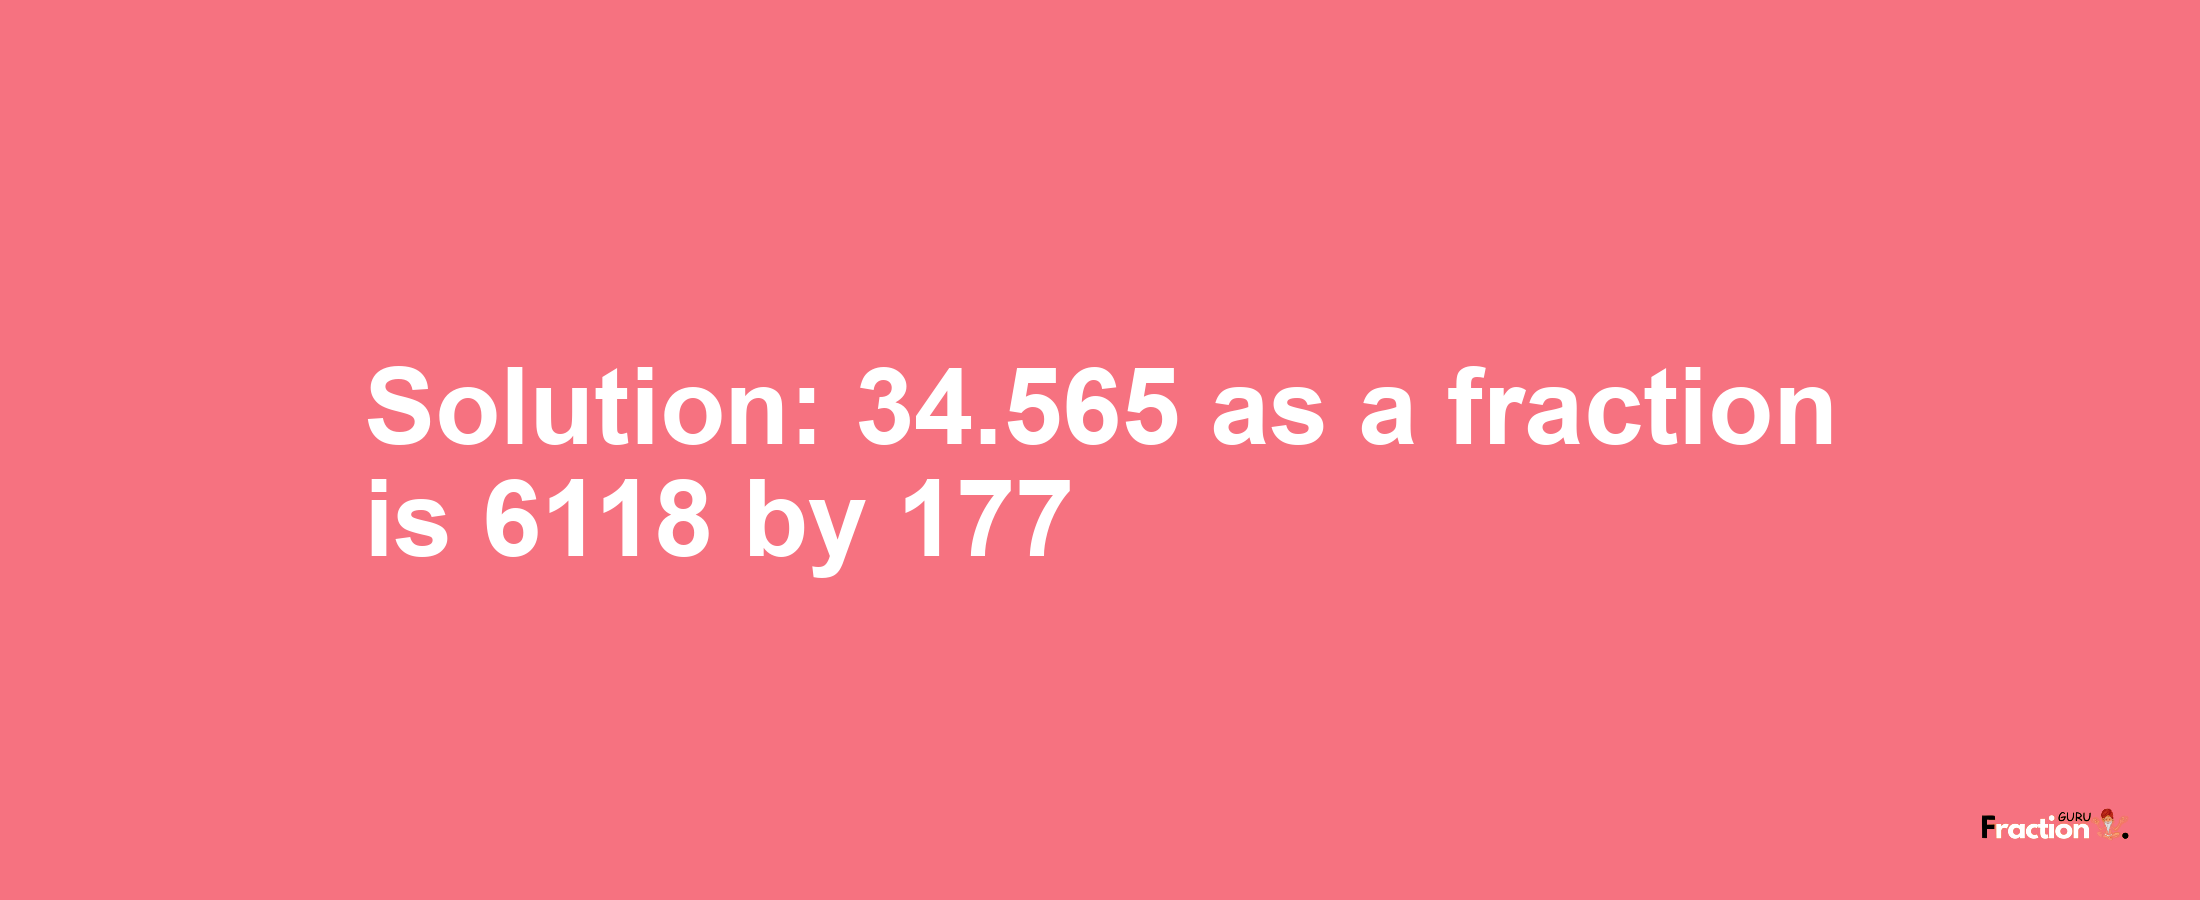 Solution:34.565 as a fraction is 6118/177